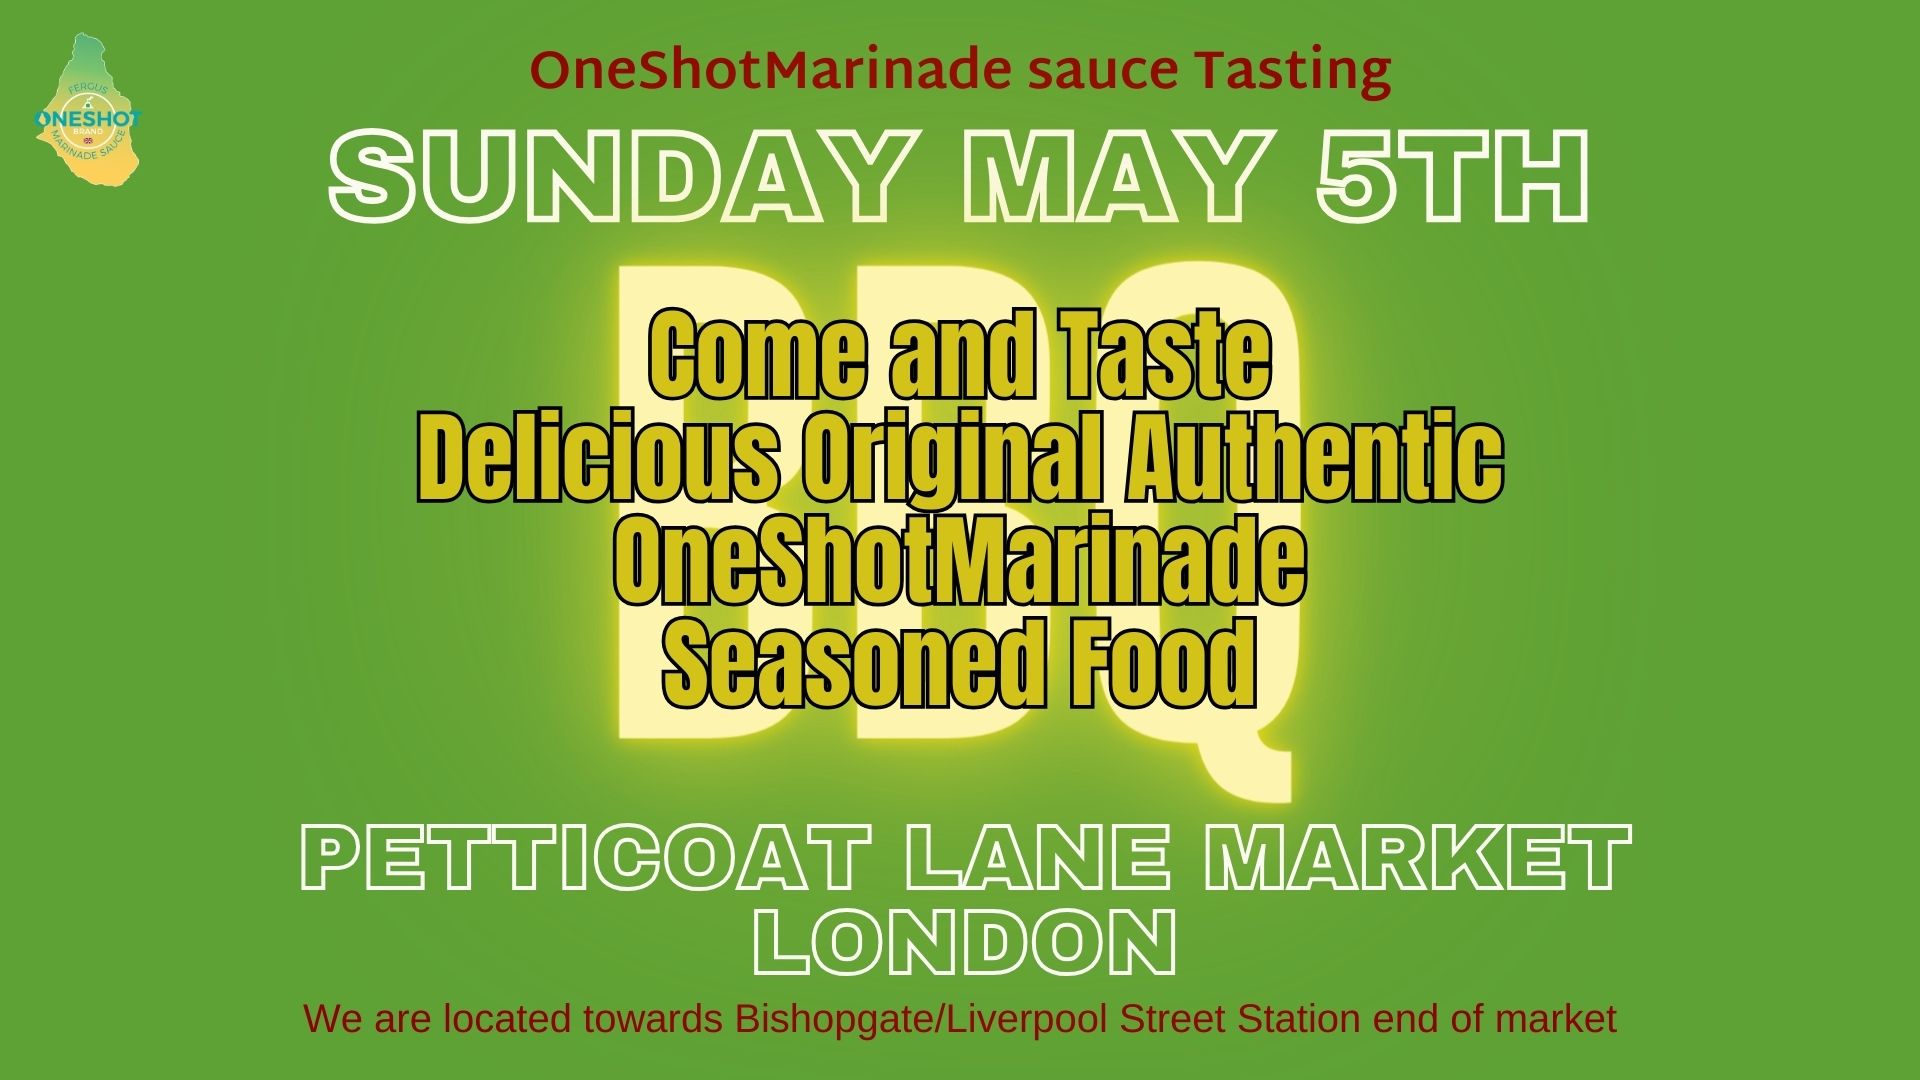 Sunday 5th May BBQ. Taste some OneShotMarinade food - Mobile Poster